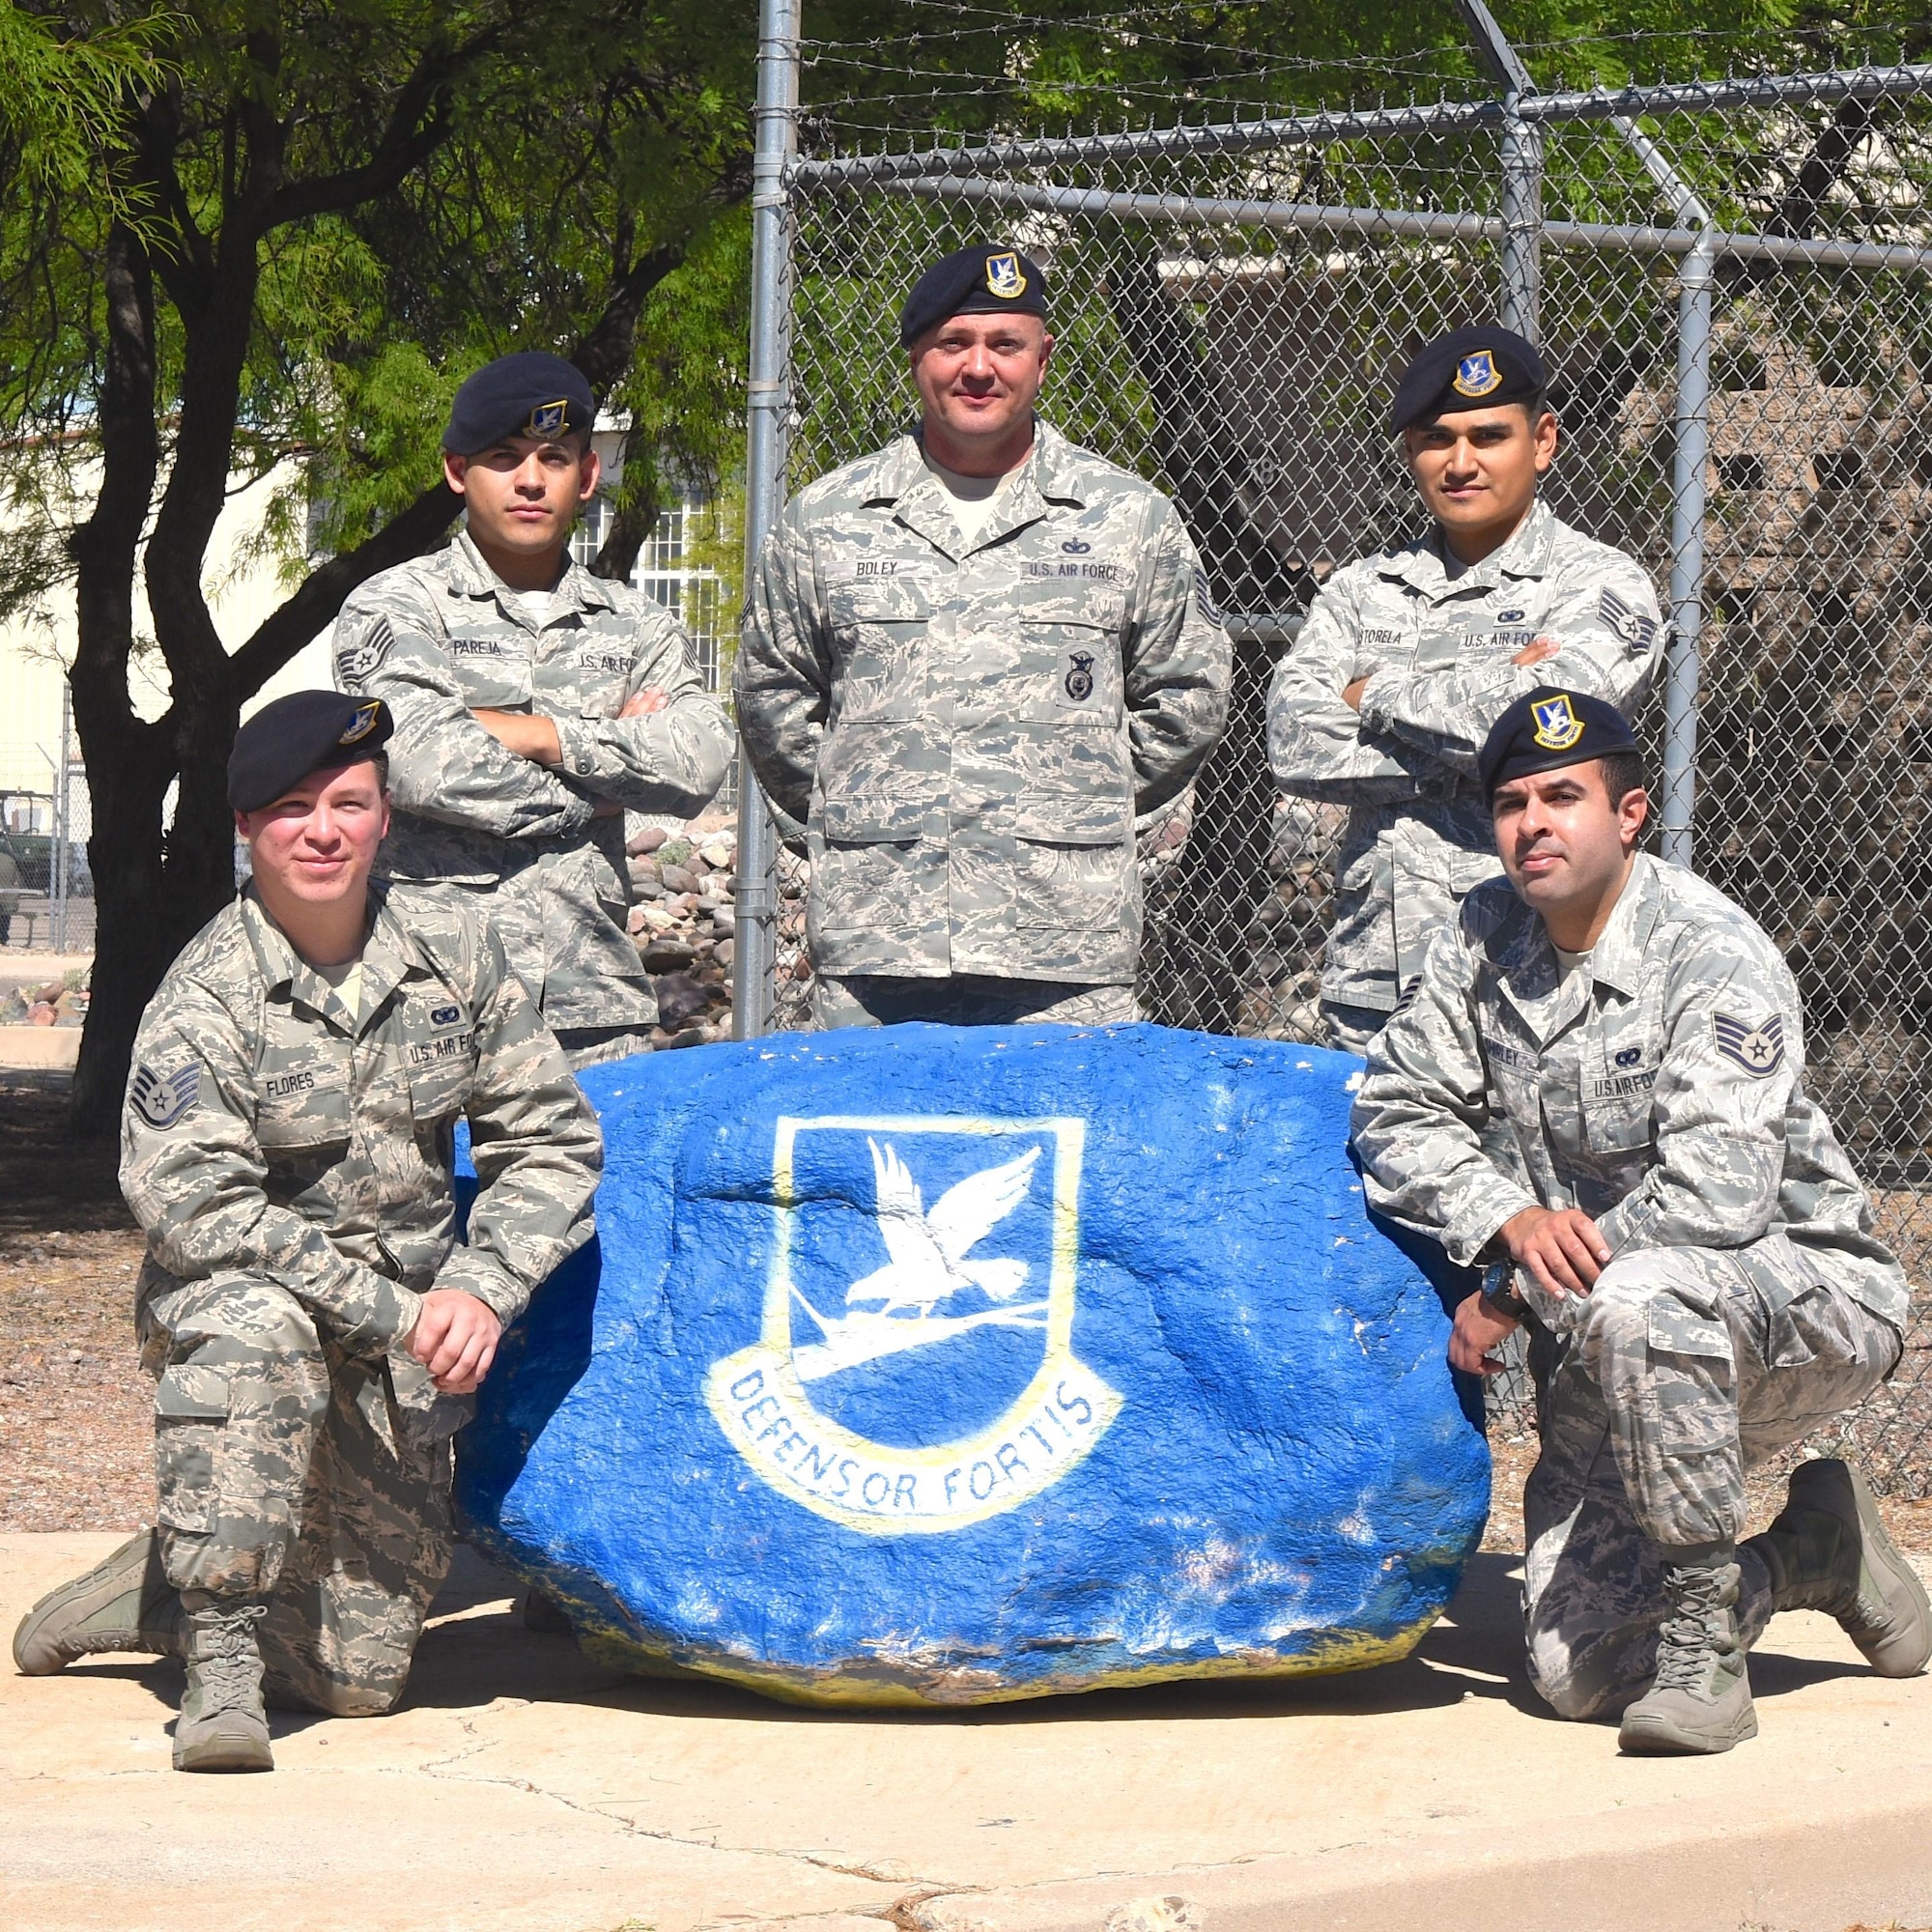 U.S. Air Force Reserve security forces members Tech. Sgt. Chris Boley and staff sergeants Juan Pareja, Francisco Shirley, Joshua Castorela, and Jose Flores are scheduled to deploy to the Dominican Republic next week from Davis-Monthan Air Force Base, Ariz. All five members are Spanish proficient and part of the 720th Security Forces Squadron, and looking forward to supporting this 12th Air Force (Air Forces South) humanitarian operation. The 720th SFS geographically-separated unit of the 920th Rescue Wing, at Patrick Air Force Base, Fla. (U.S. Air Force photo by Carolyn Herrick)